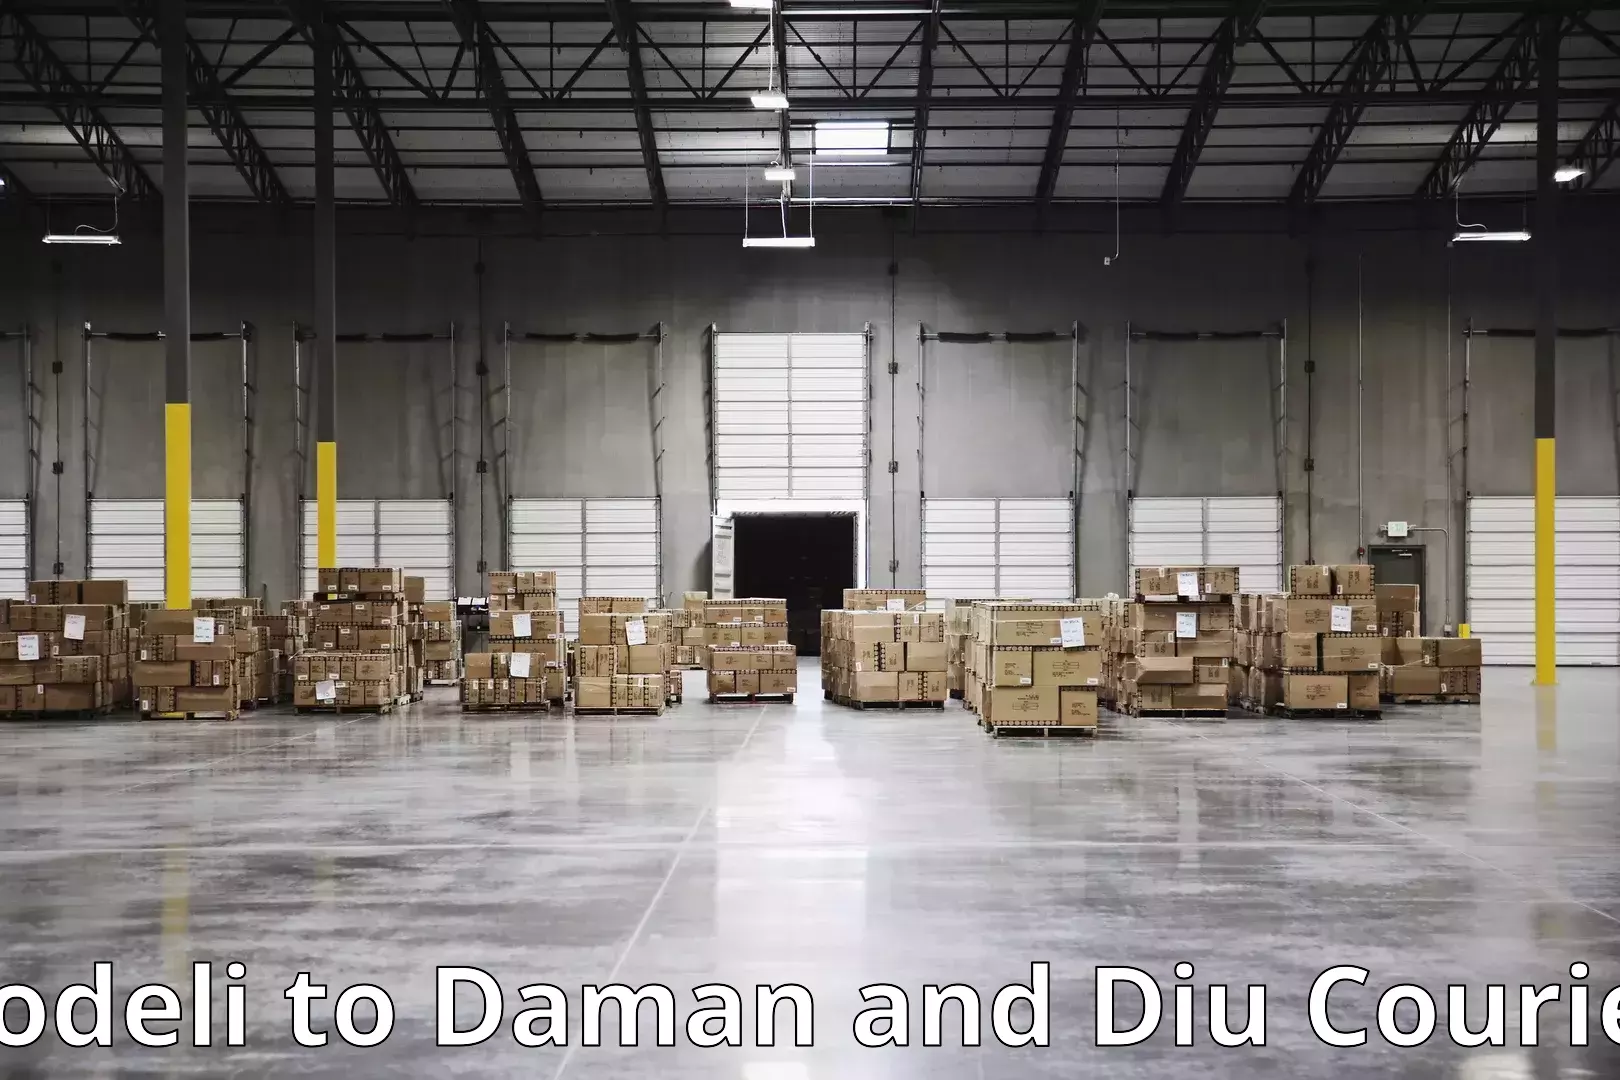 Furniture transport specialists Bodeli to Daman and Diu